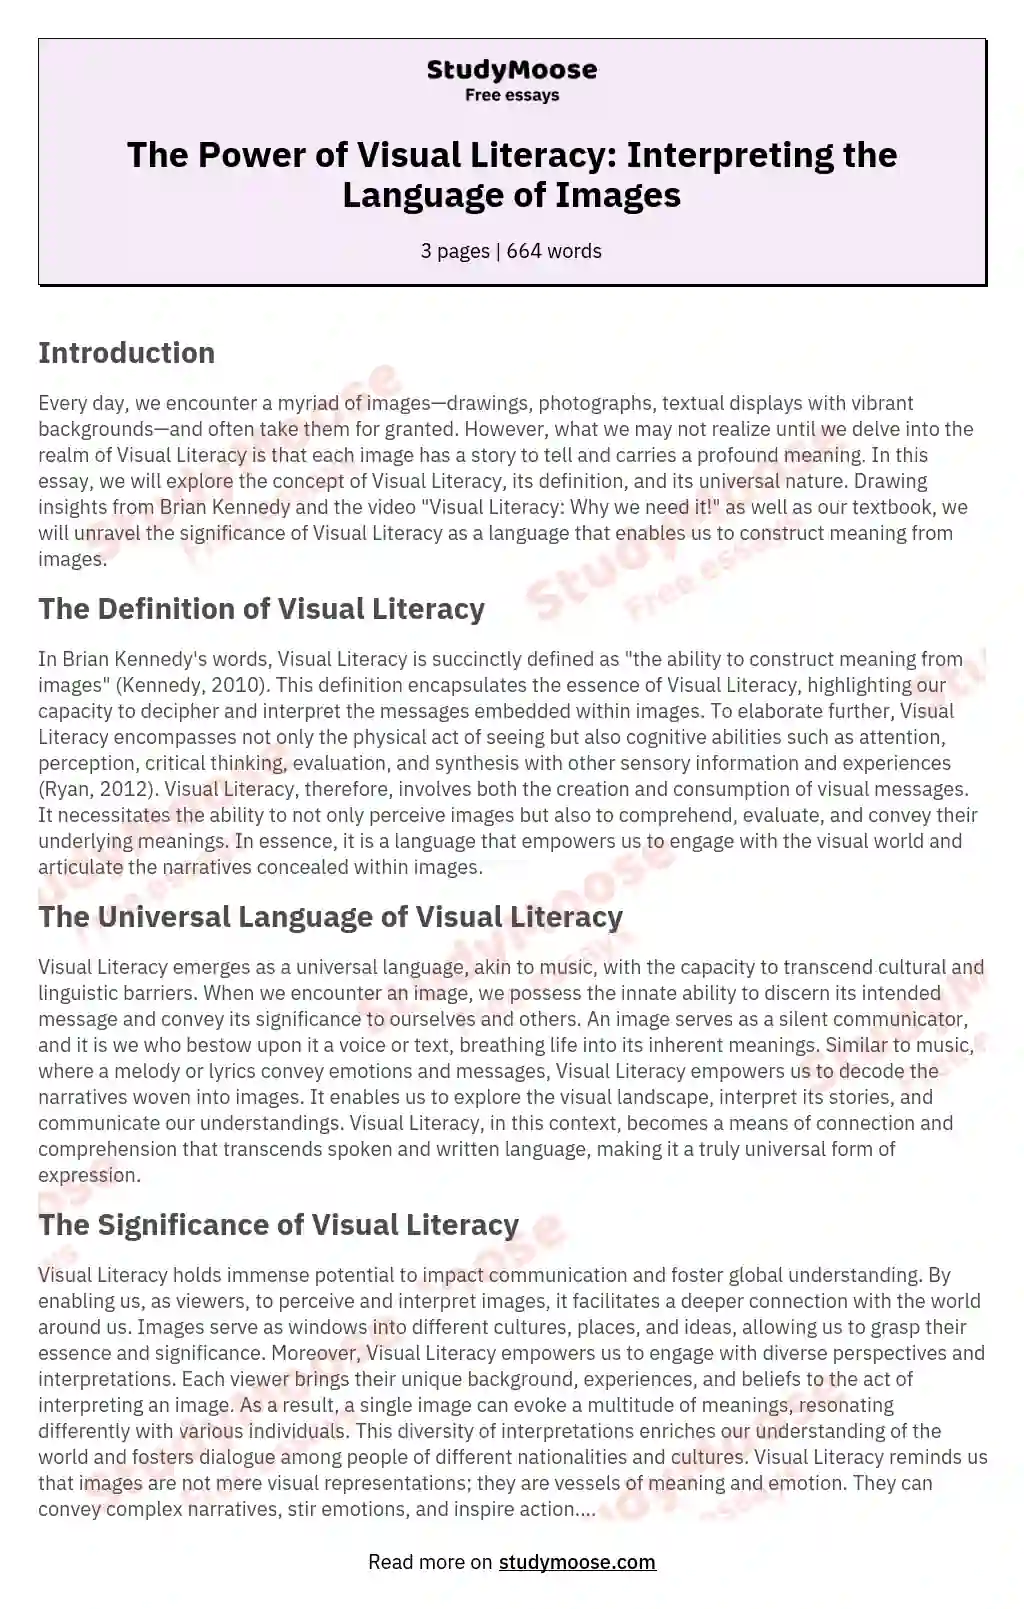 The Power of Visual Literacy: Interpreting the Language of Images essay